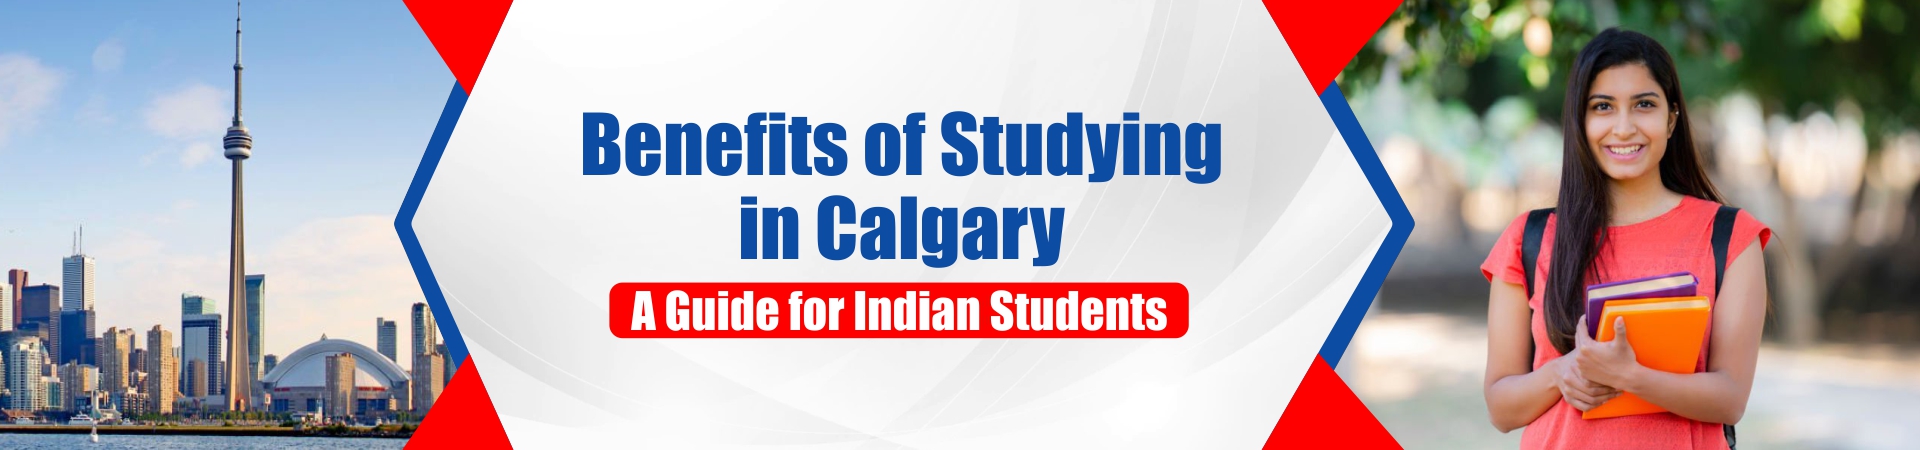 Benefits of Studying in Calgary - Pyramid eServices